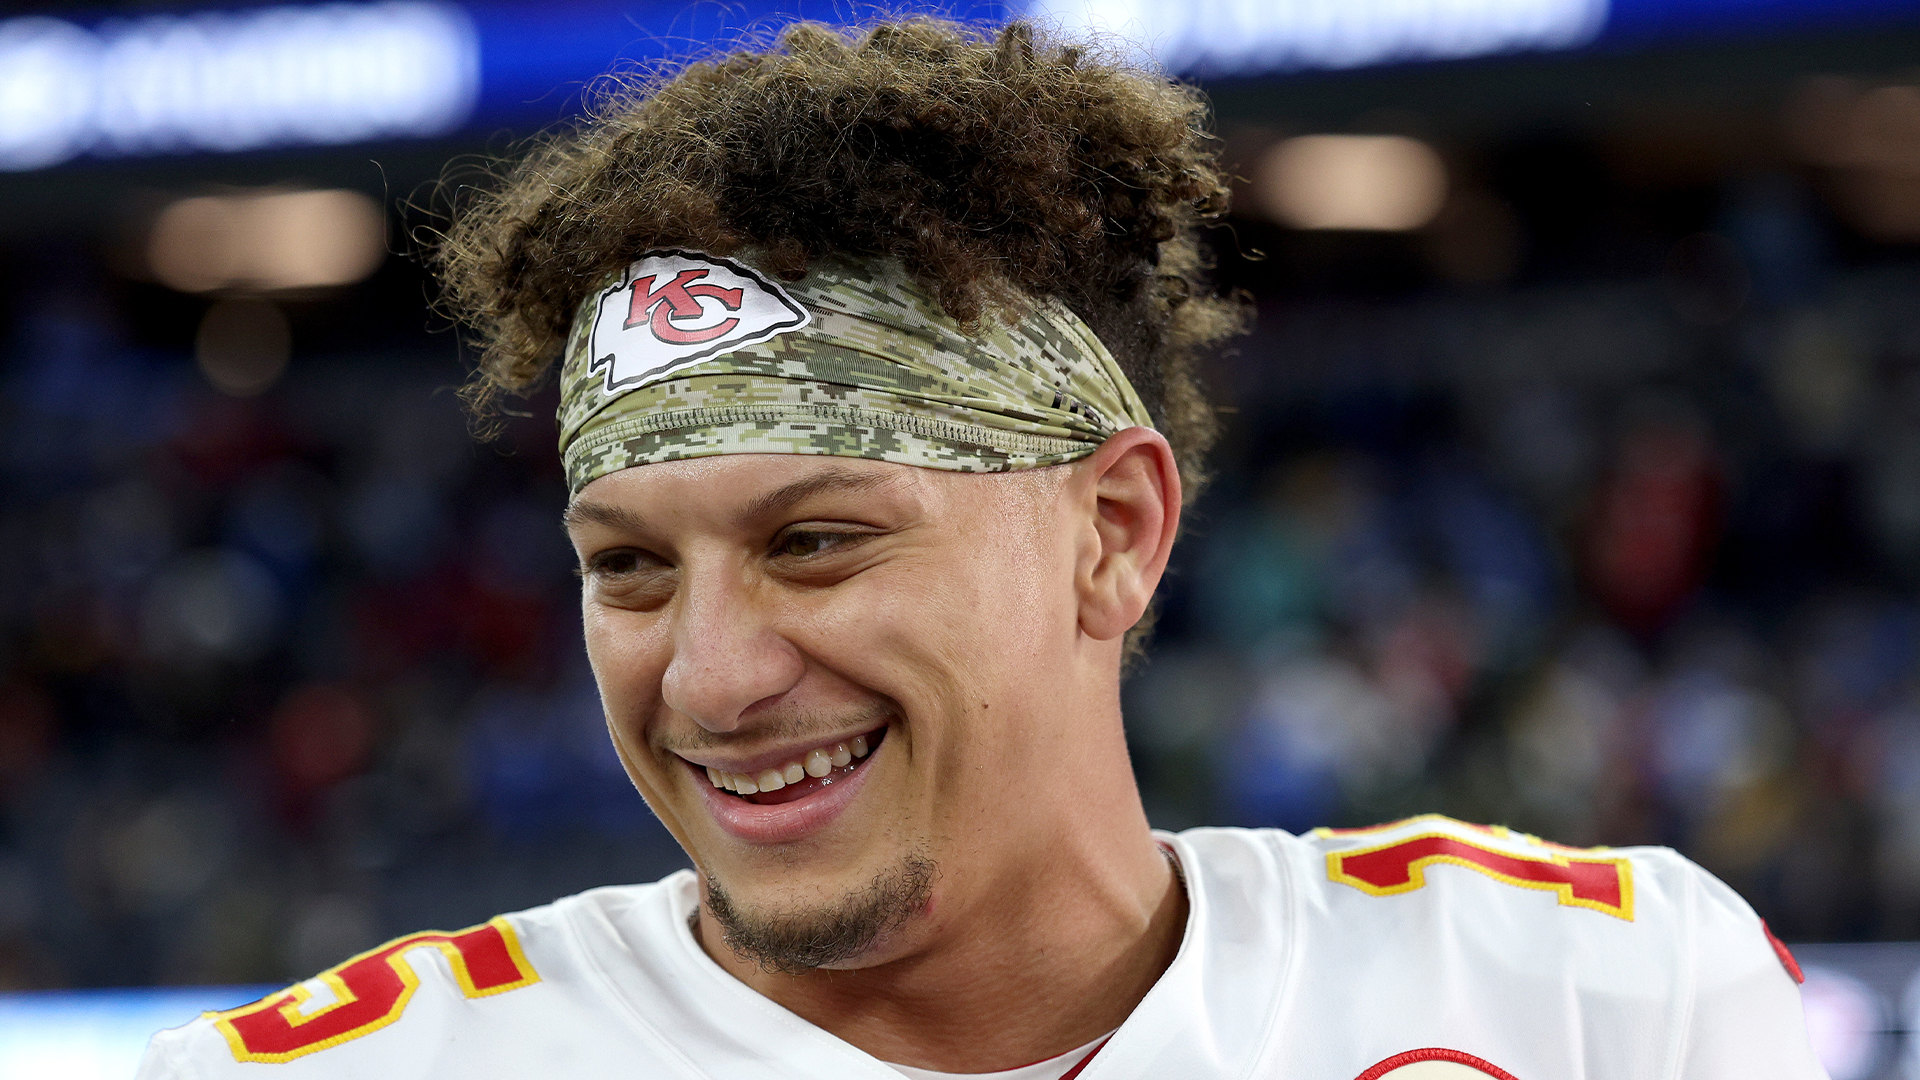 Patrick Mahomes Inks An Endorsement Deal With Energy Drink Company Prime As It's On The Brink Of Surpassing $1.2B In Annual Sales For 2023